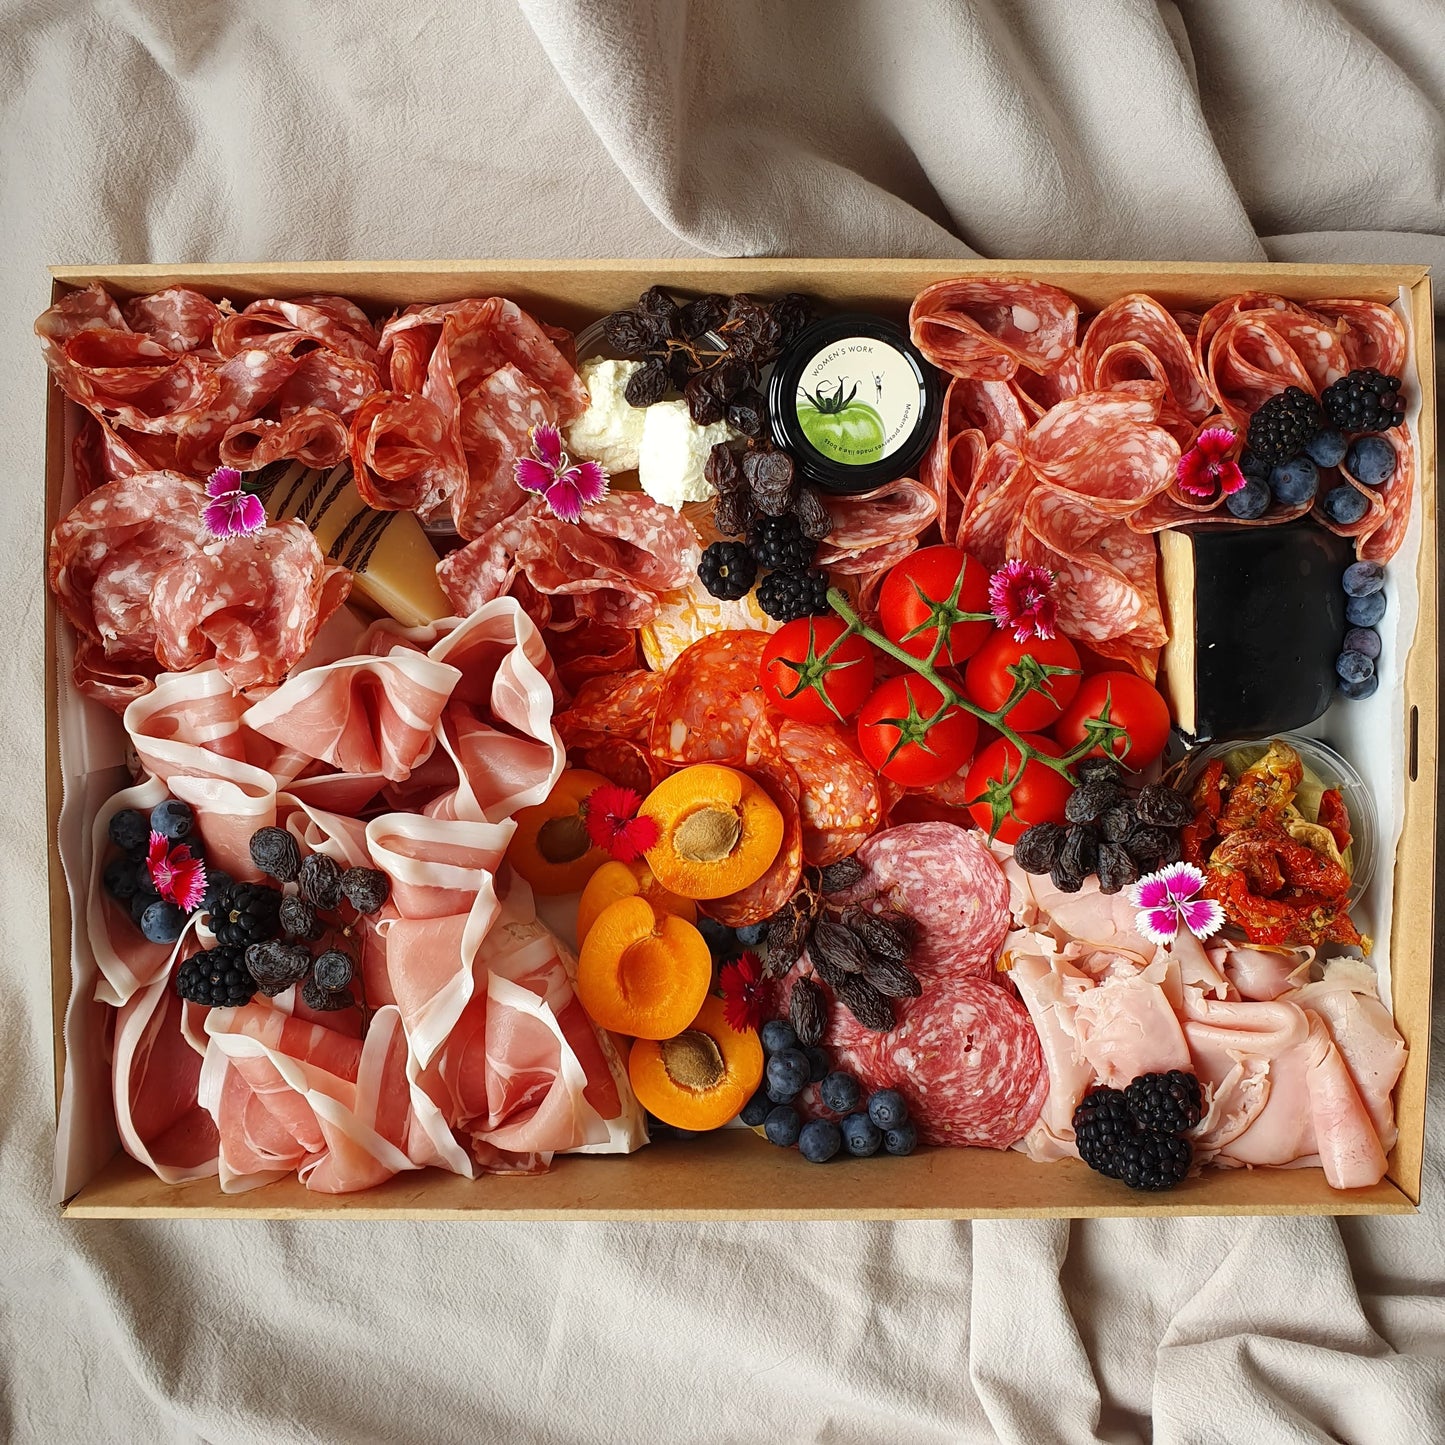 Large Cheese & Charcuterie Grazing Box - Serves 10-12